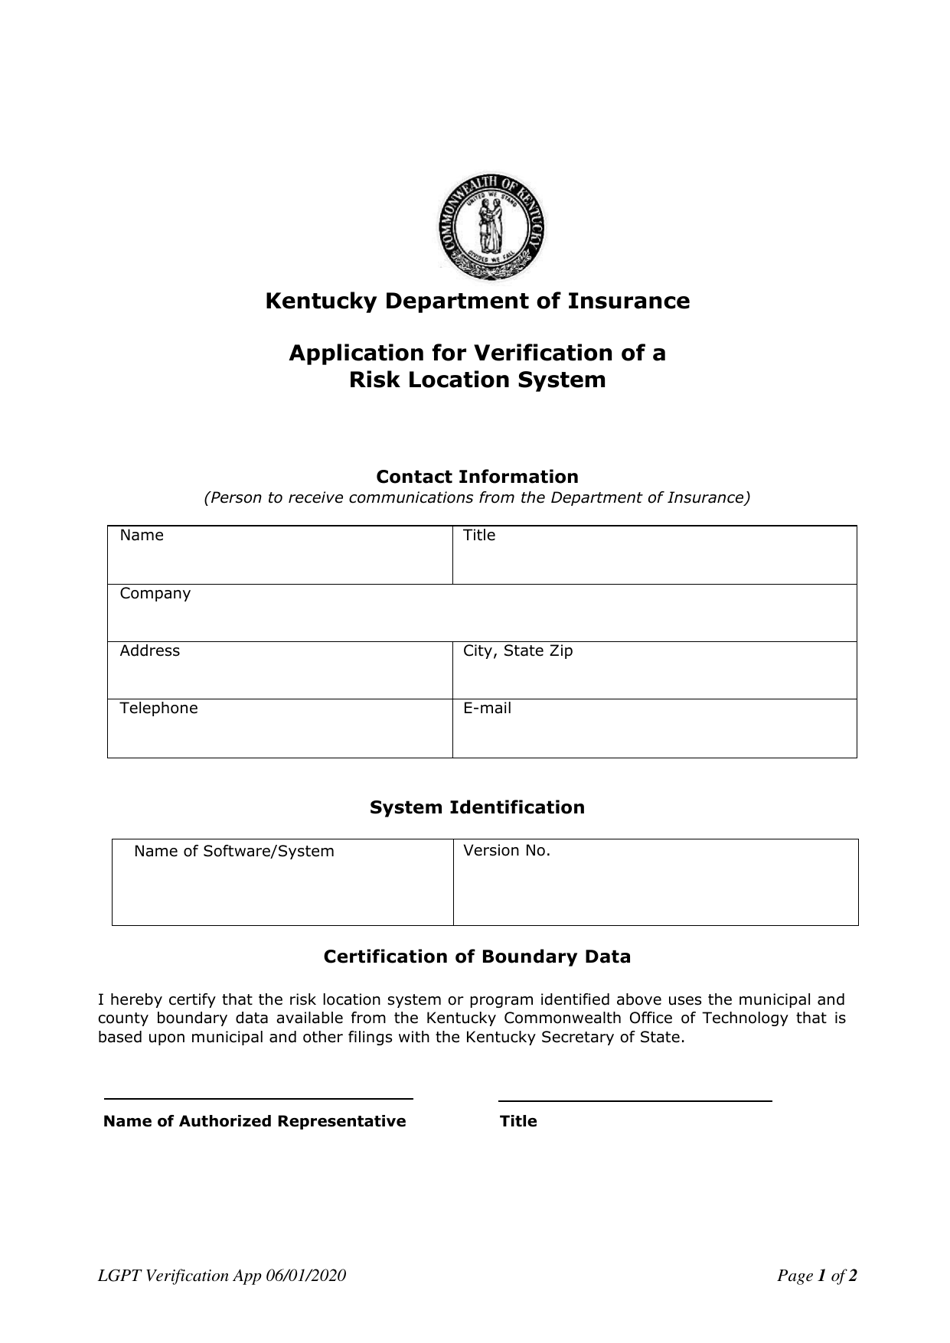 Application for Verification of a Risk Location System - Kentucky, Page 1